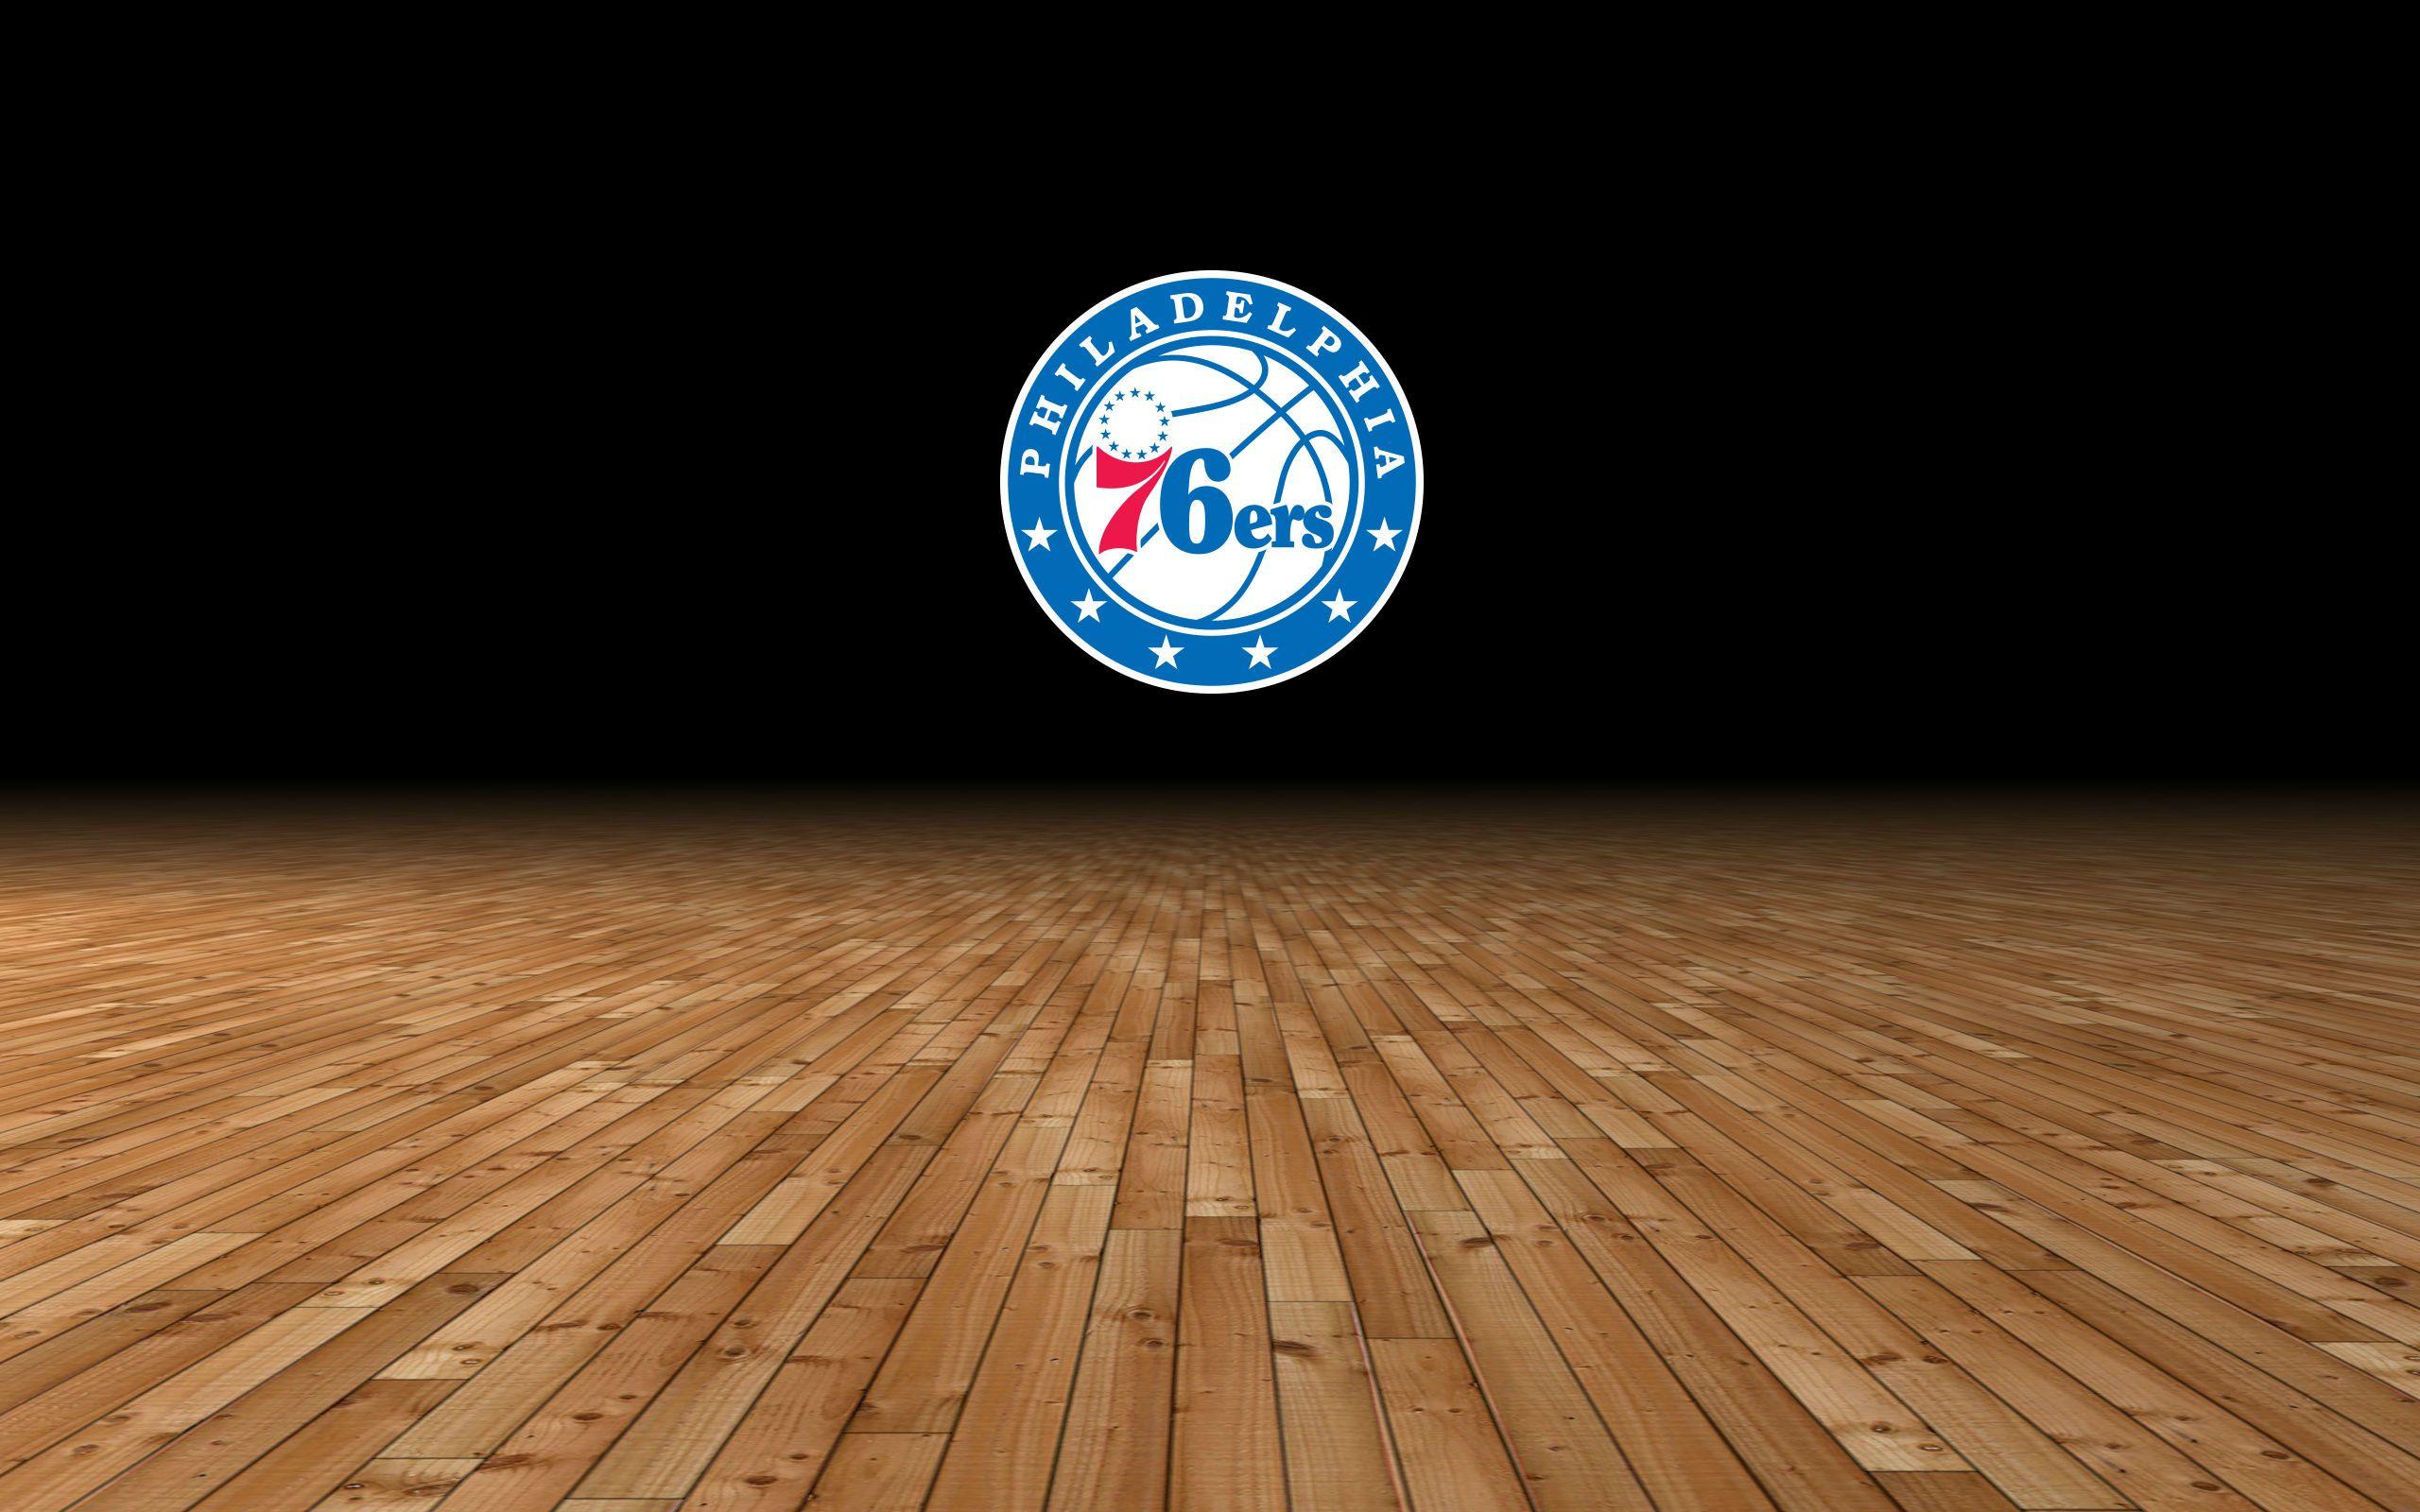 76ers Wallpapers Top Free 76ers Backgrounds Wallpaperaccess